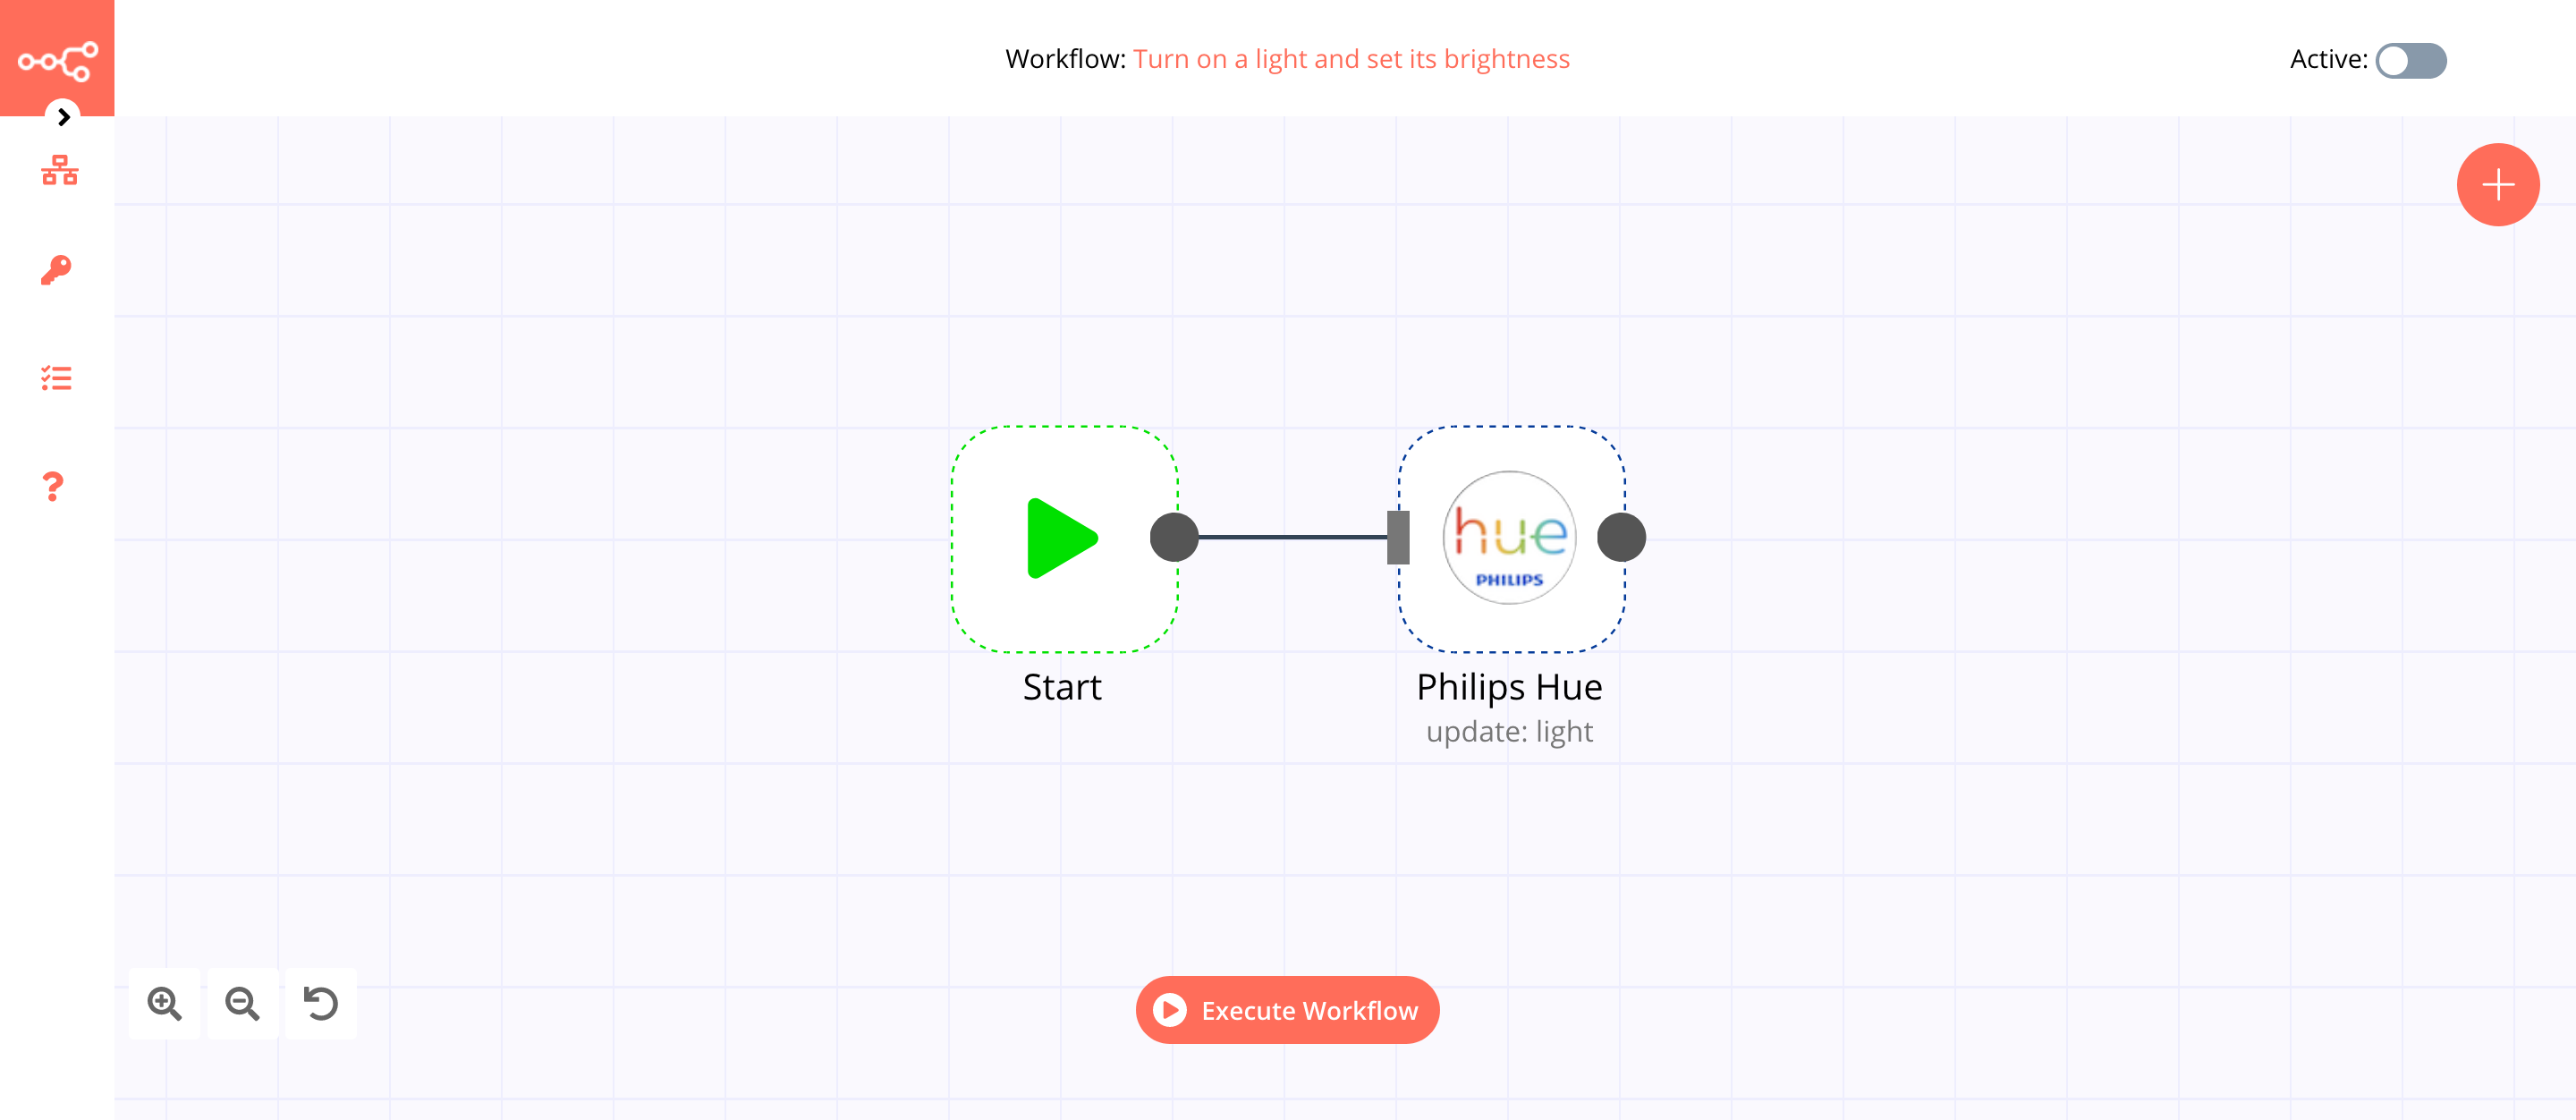 A workflow with the Philips Hue node